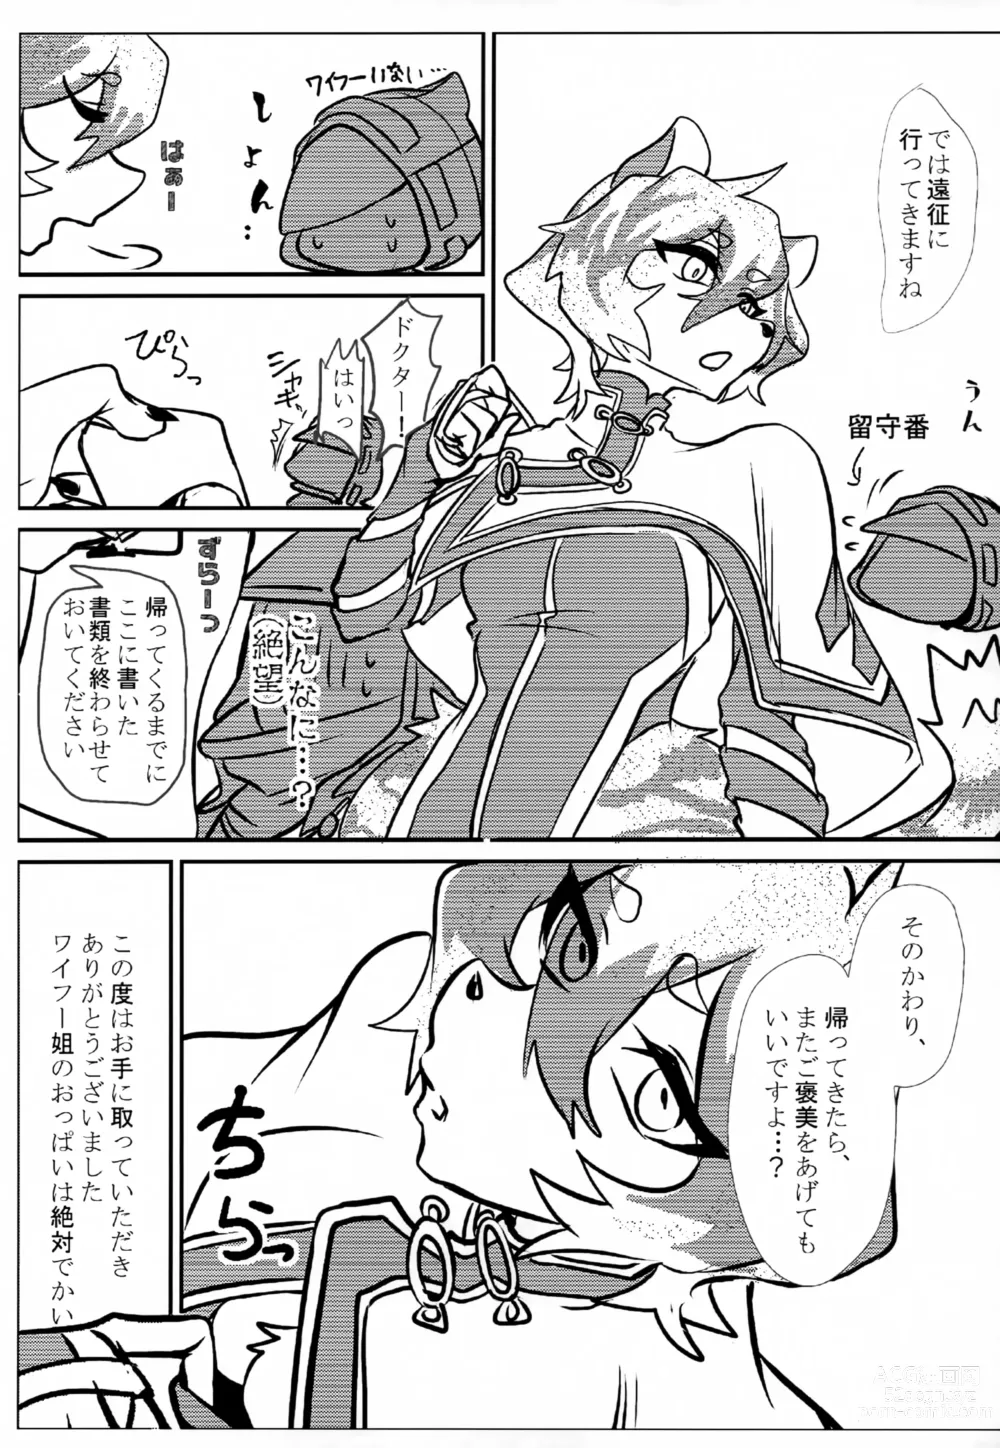 Page 21 of doujinshi Rhodes Gift